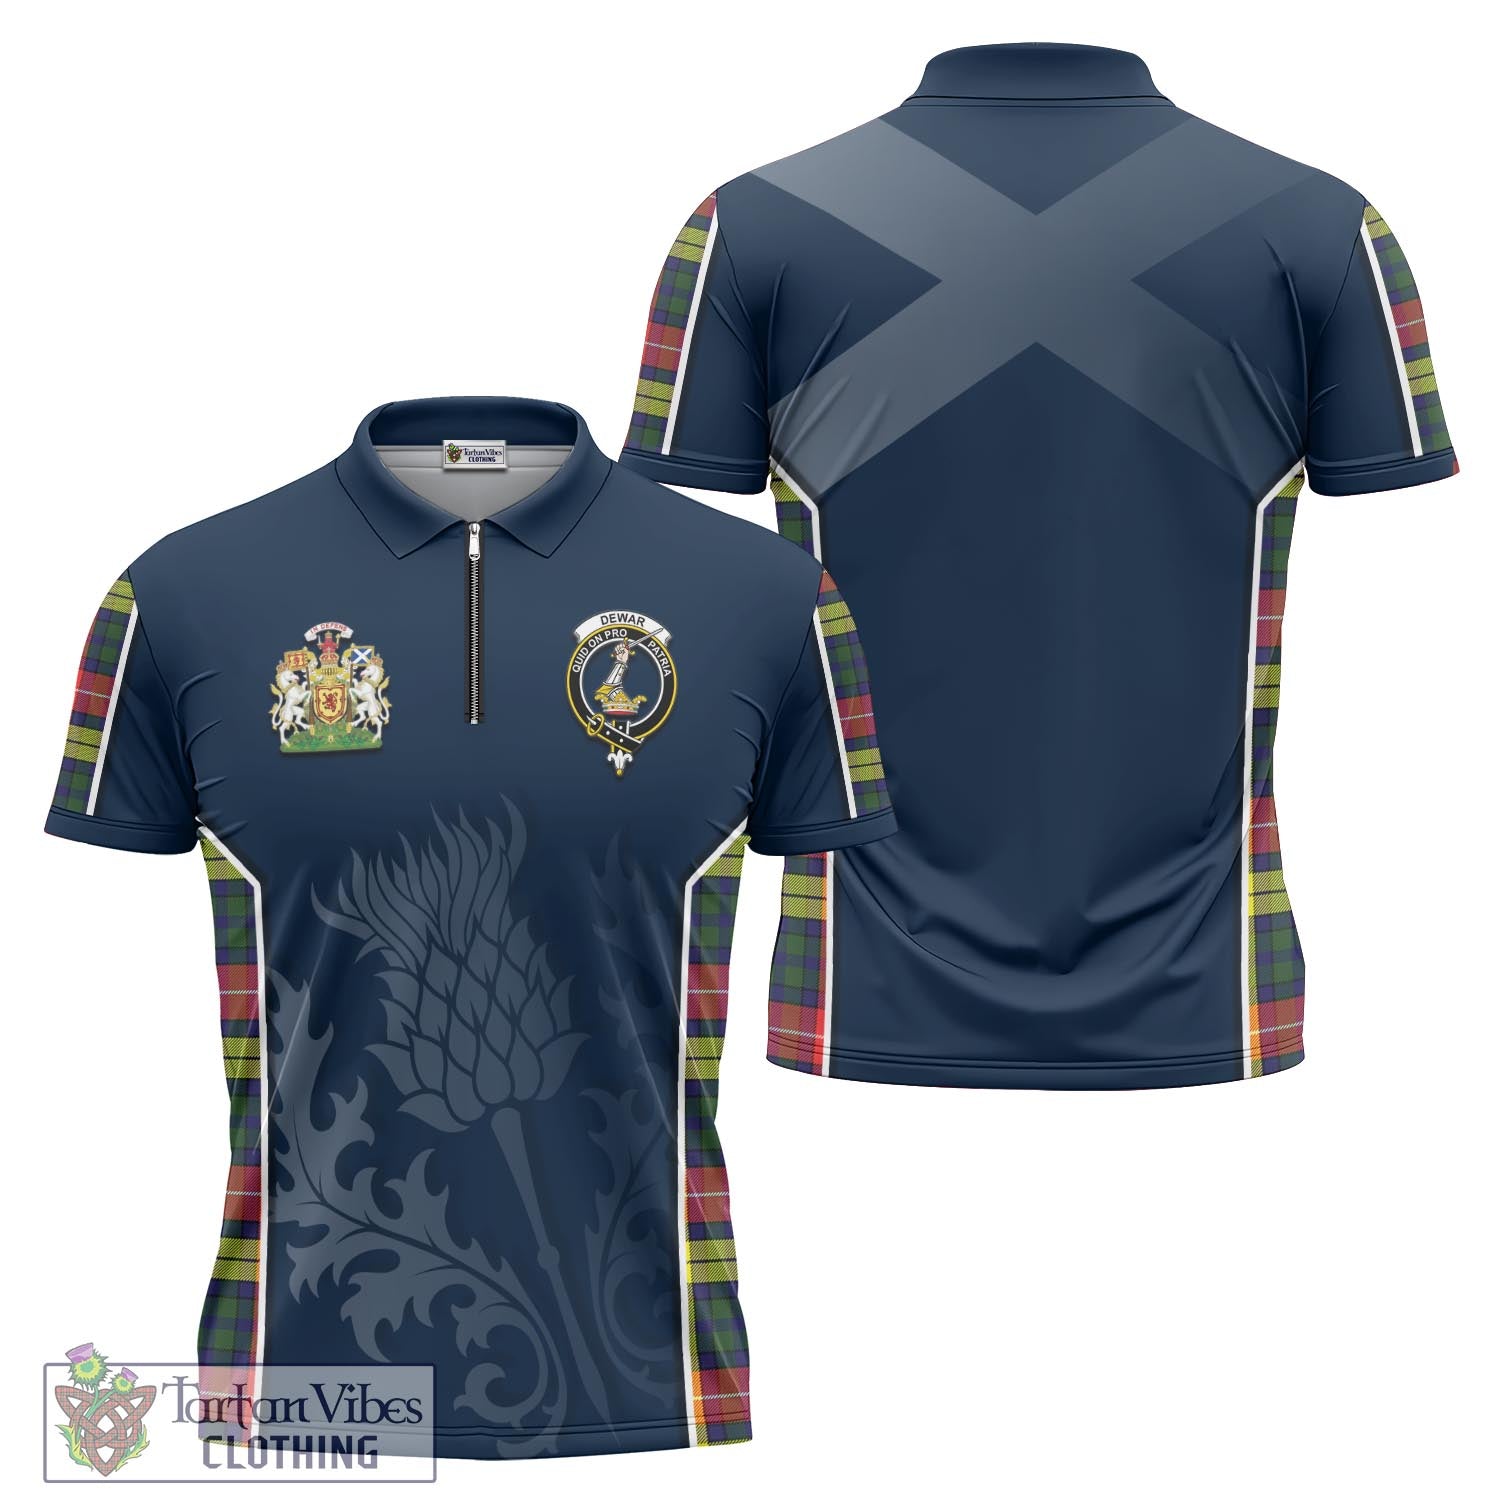 Tartan Vibes Clothing Dewar Tartan Zipper Polo Shirt with Family Crest and Scottish Thistle Vibes Sport Style